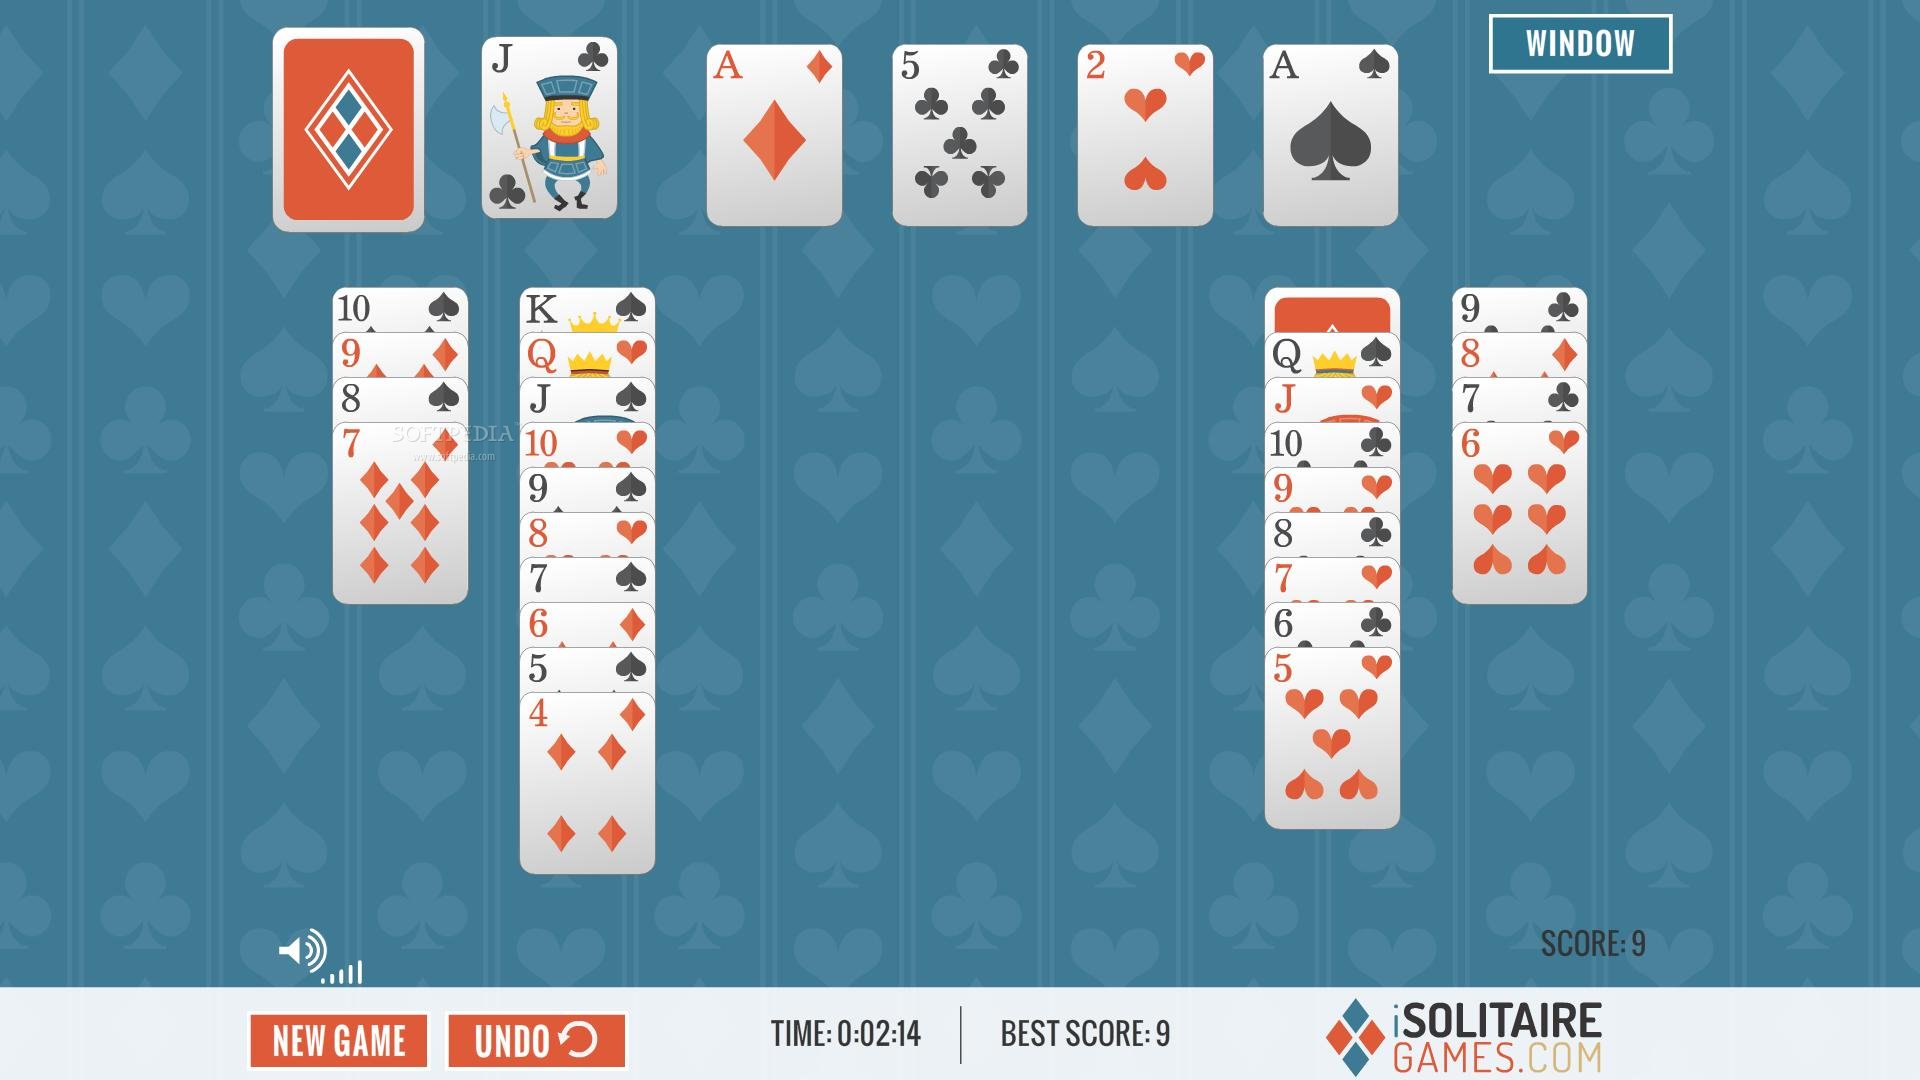 classic windows games download solitaire